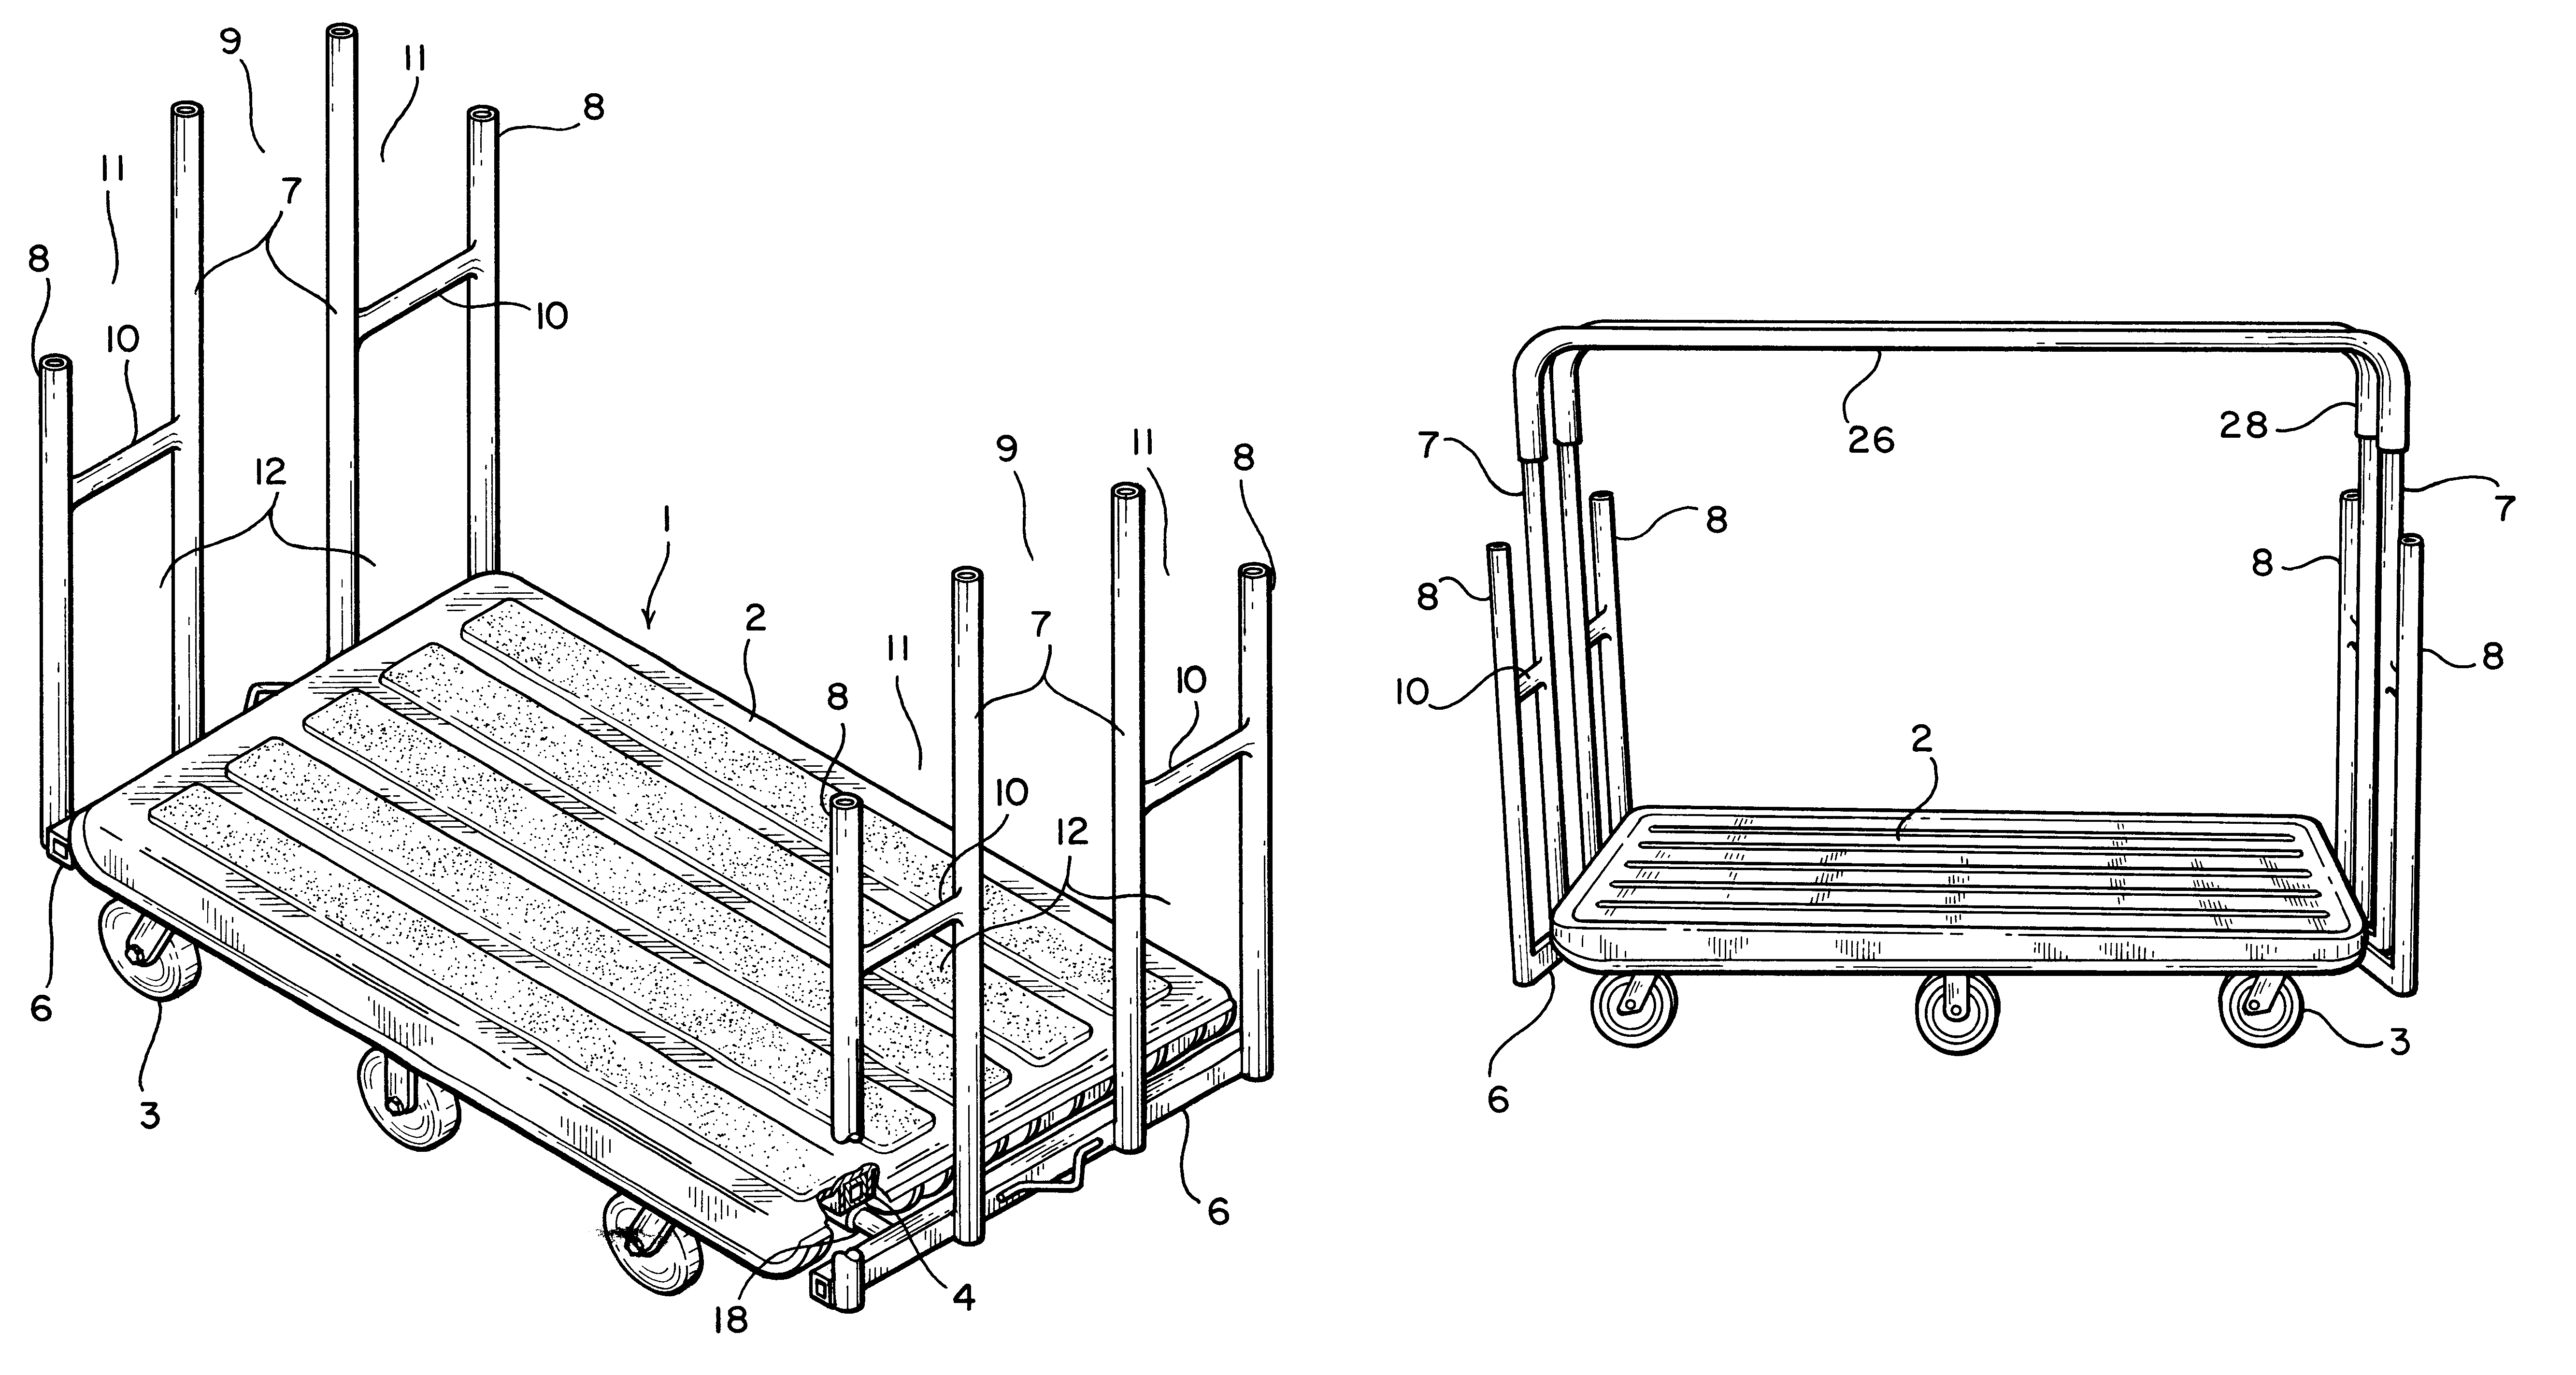 Modular universal flat bed cart with variable support and maneuvering handles